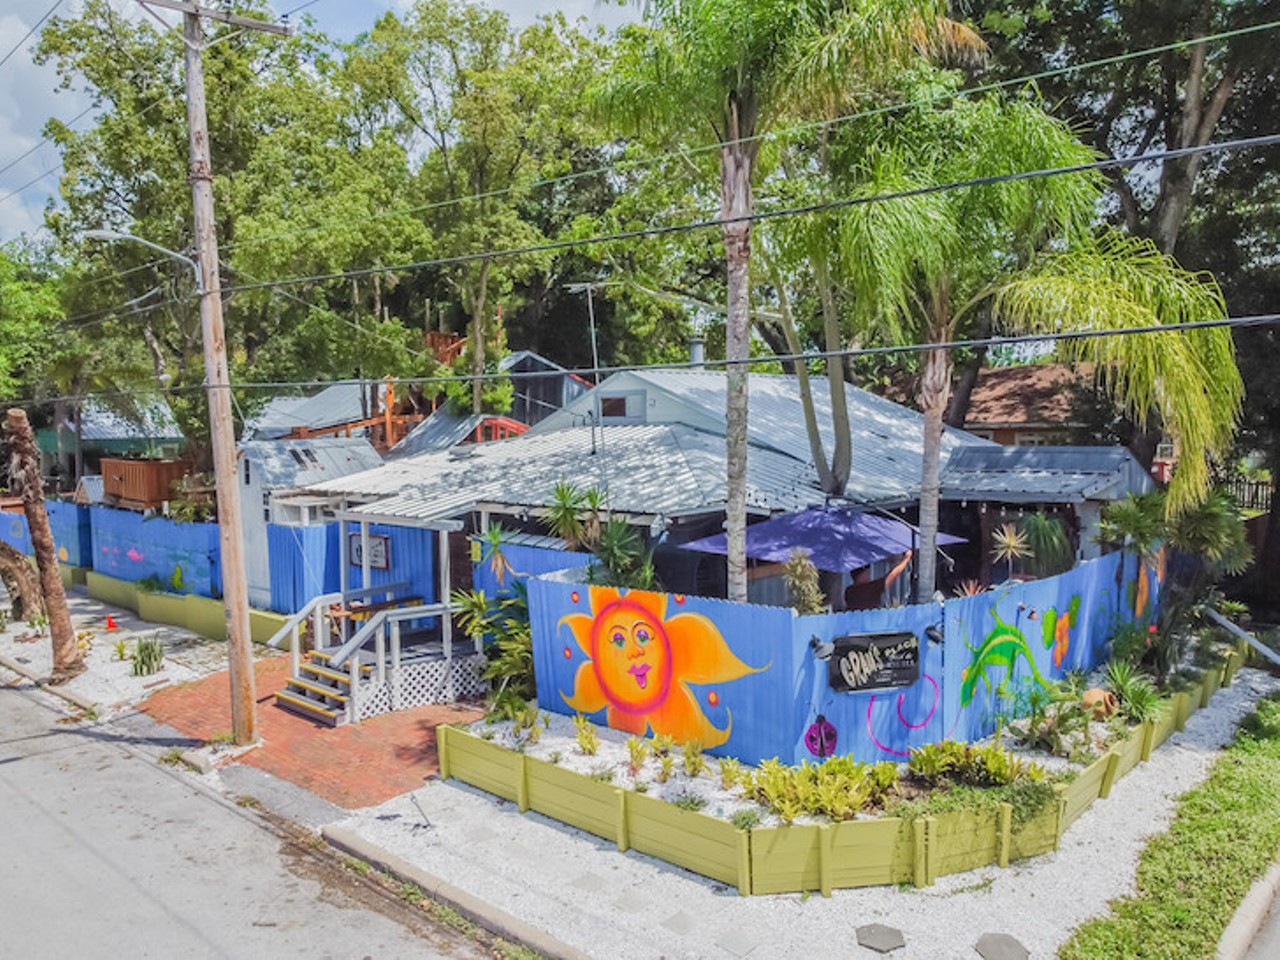 Tampa Heights' iconic hostel Gram's Place is now for sale